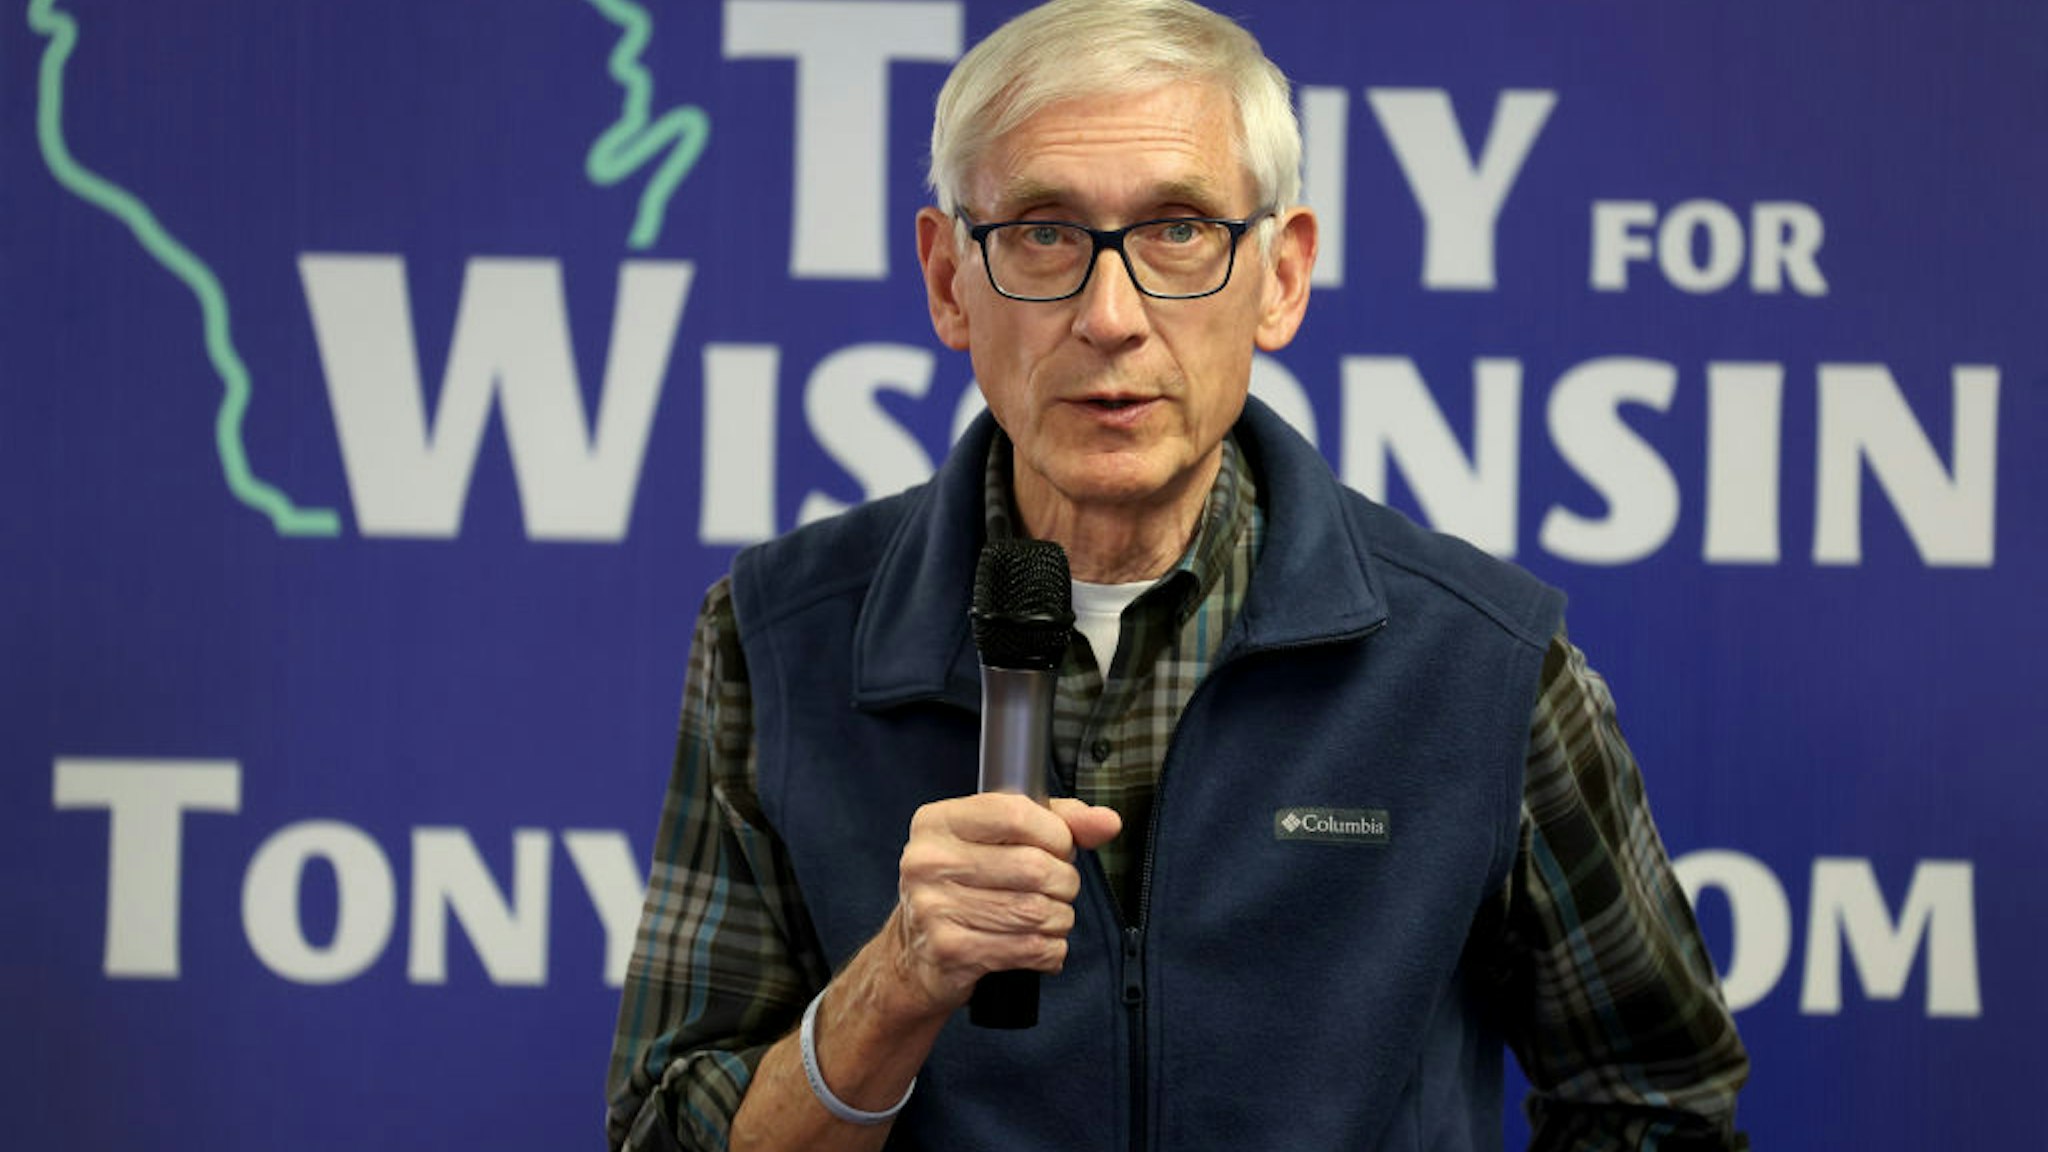 MILWAUKEE, WISCONSIN - NOVEMBER 07: Wisconsin Governor Tony Evers speaks with supporters during a canvas launch event on November 7, 2022 in Milwaukee, Wisconsin. Evers, a Democrat, is in a tight race with his Republican challenger Tim Michels heading into tomorrow's election.